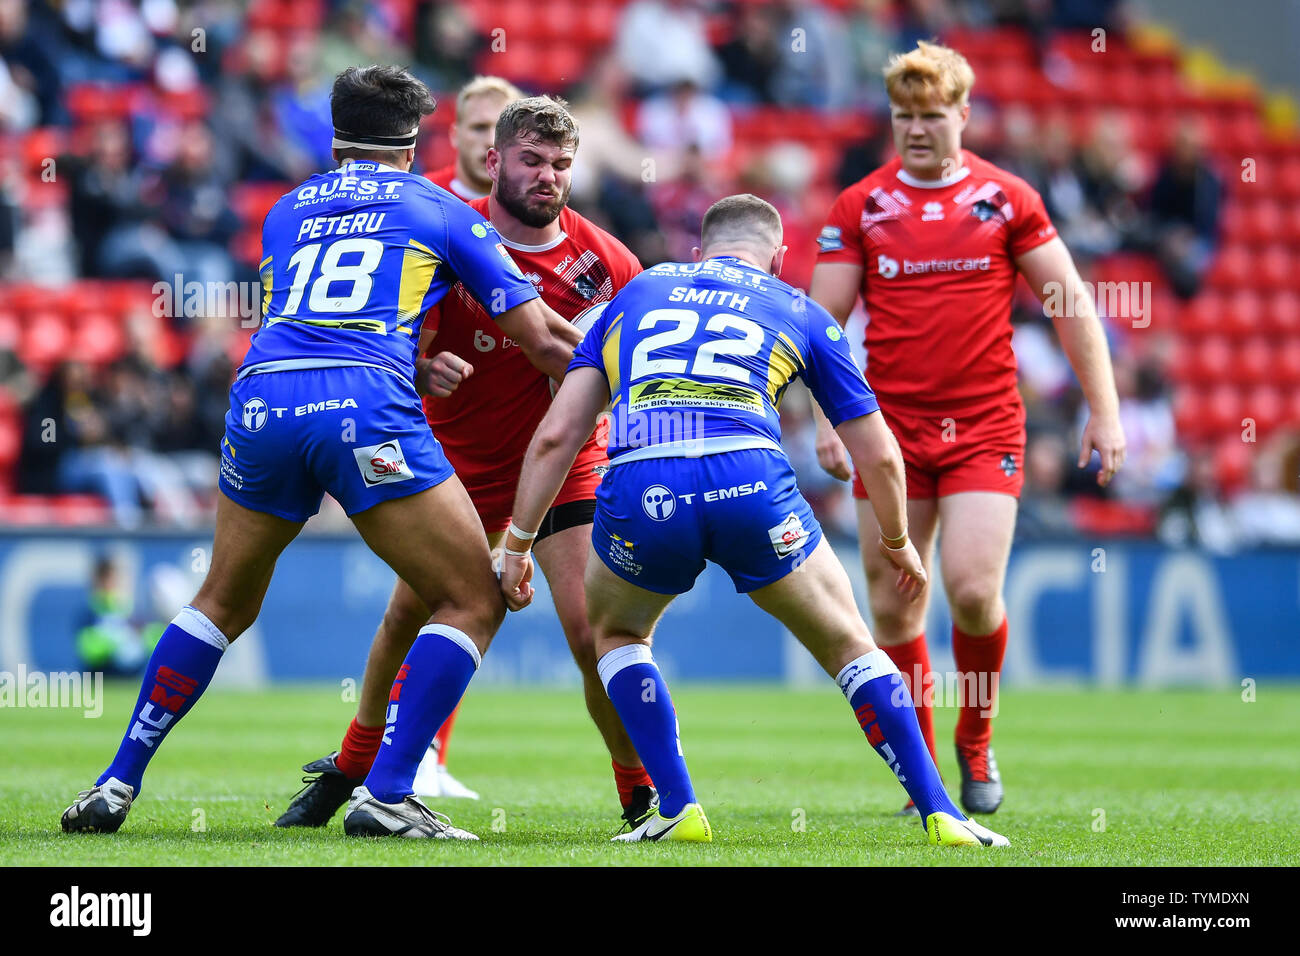 26th May 2019 , Anfield Stadium, Liverpool, England; Dacia Magic Weekend, Betfred Super League Round 16, Leeds Rhinos vs London Broncos ; Robert Butler (23) of London Broncos is tackled by Nathaniel Peteru (18) of Leeds Rhinos  Credit: Craig Thomas/News Images Stock Photo